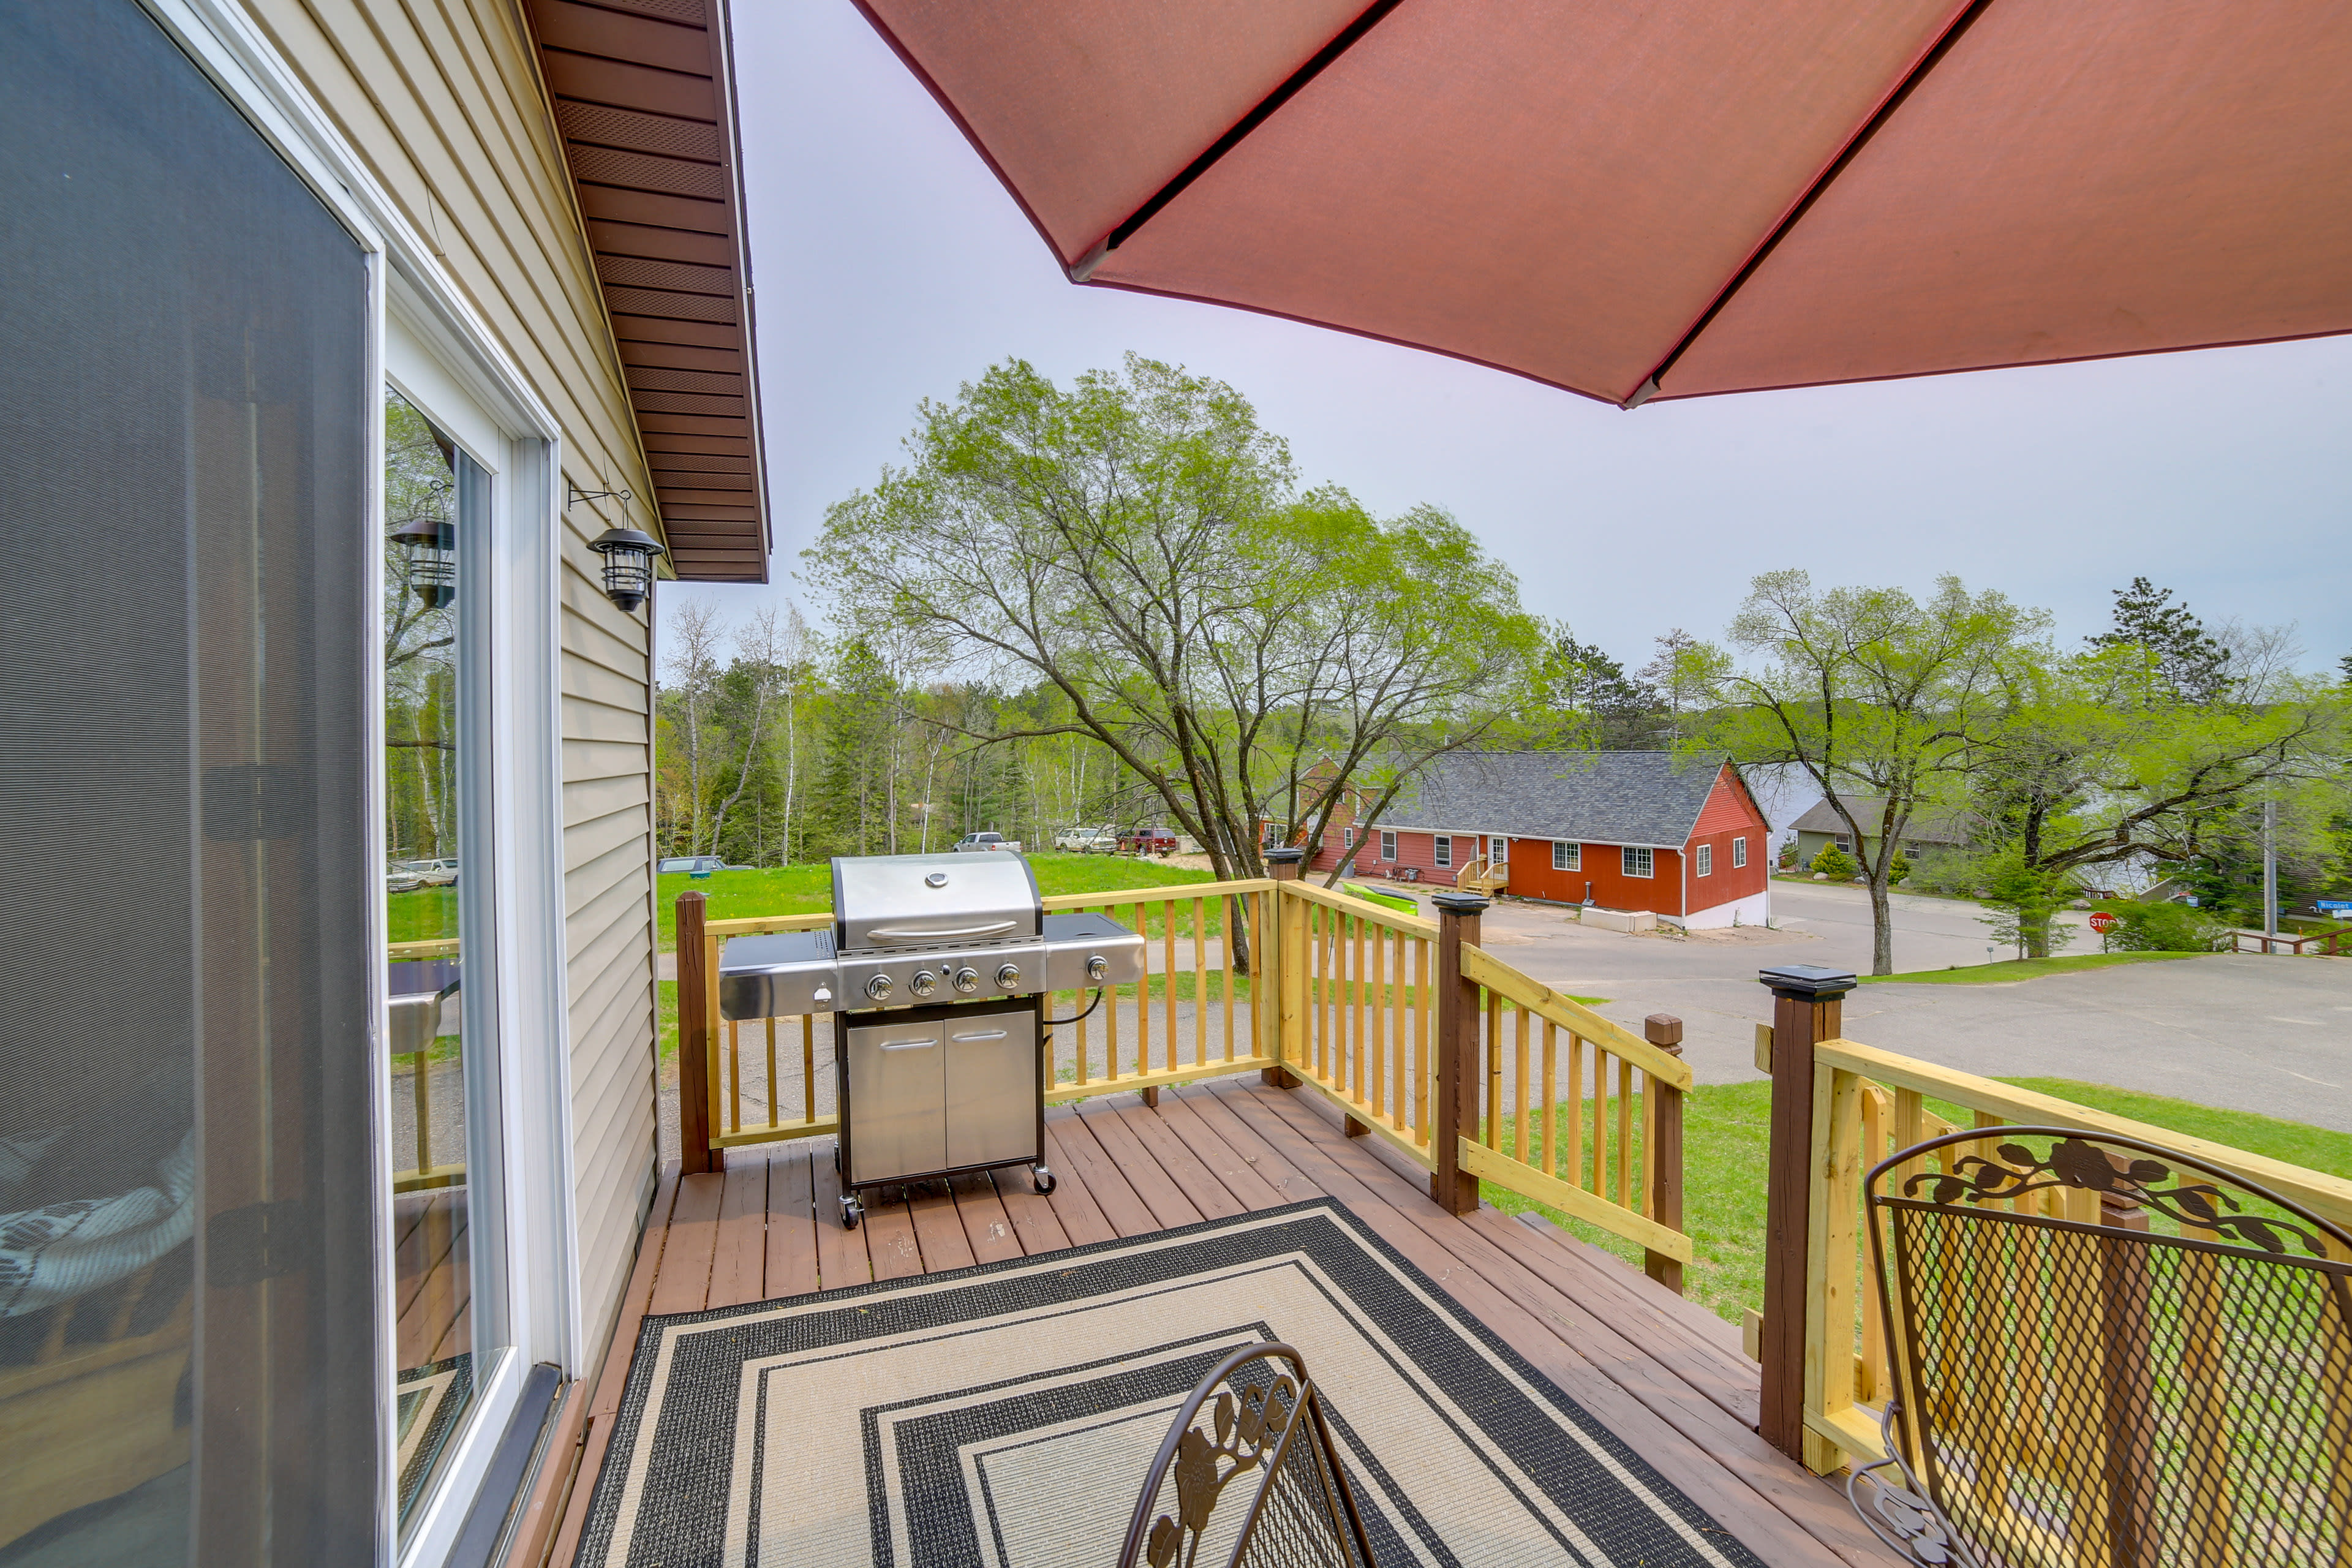 Deck | Outdoor Dining Area | Gas Grill (Propane Provided)